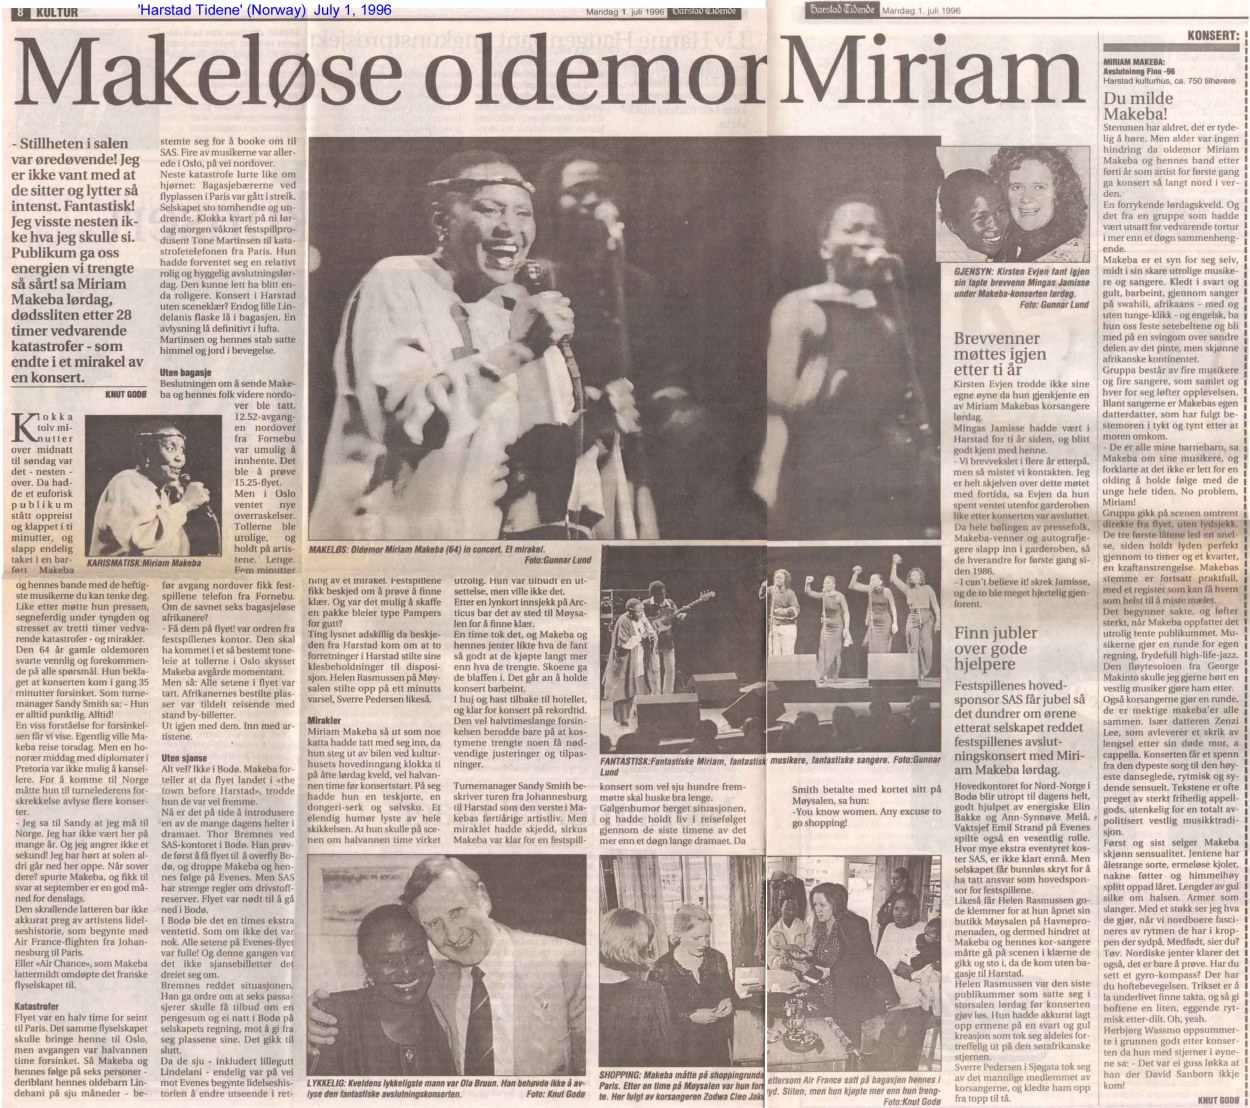 'Harstad Tidene' (Norway) July 1, 1996 - Pages 8 and 9.  Mingas with Miriam Makeba in Harstad, Norway